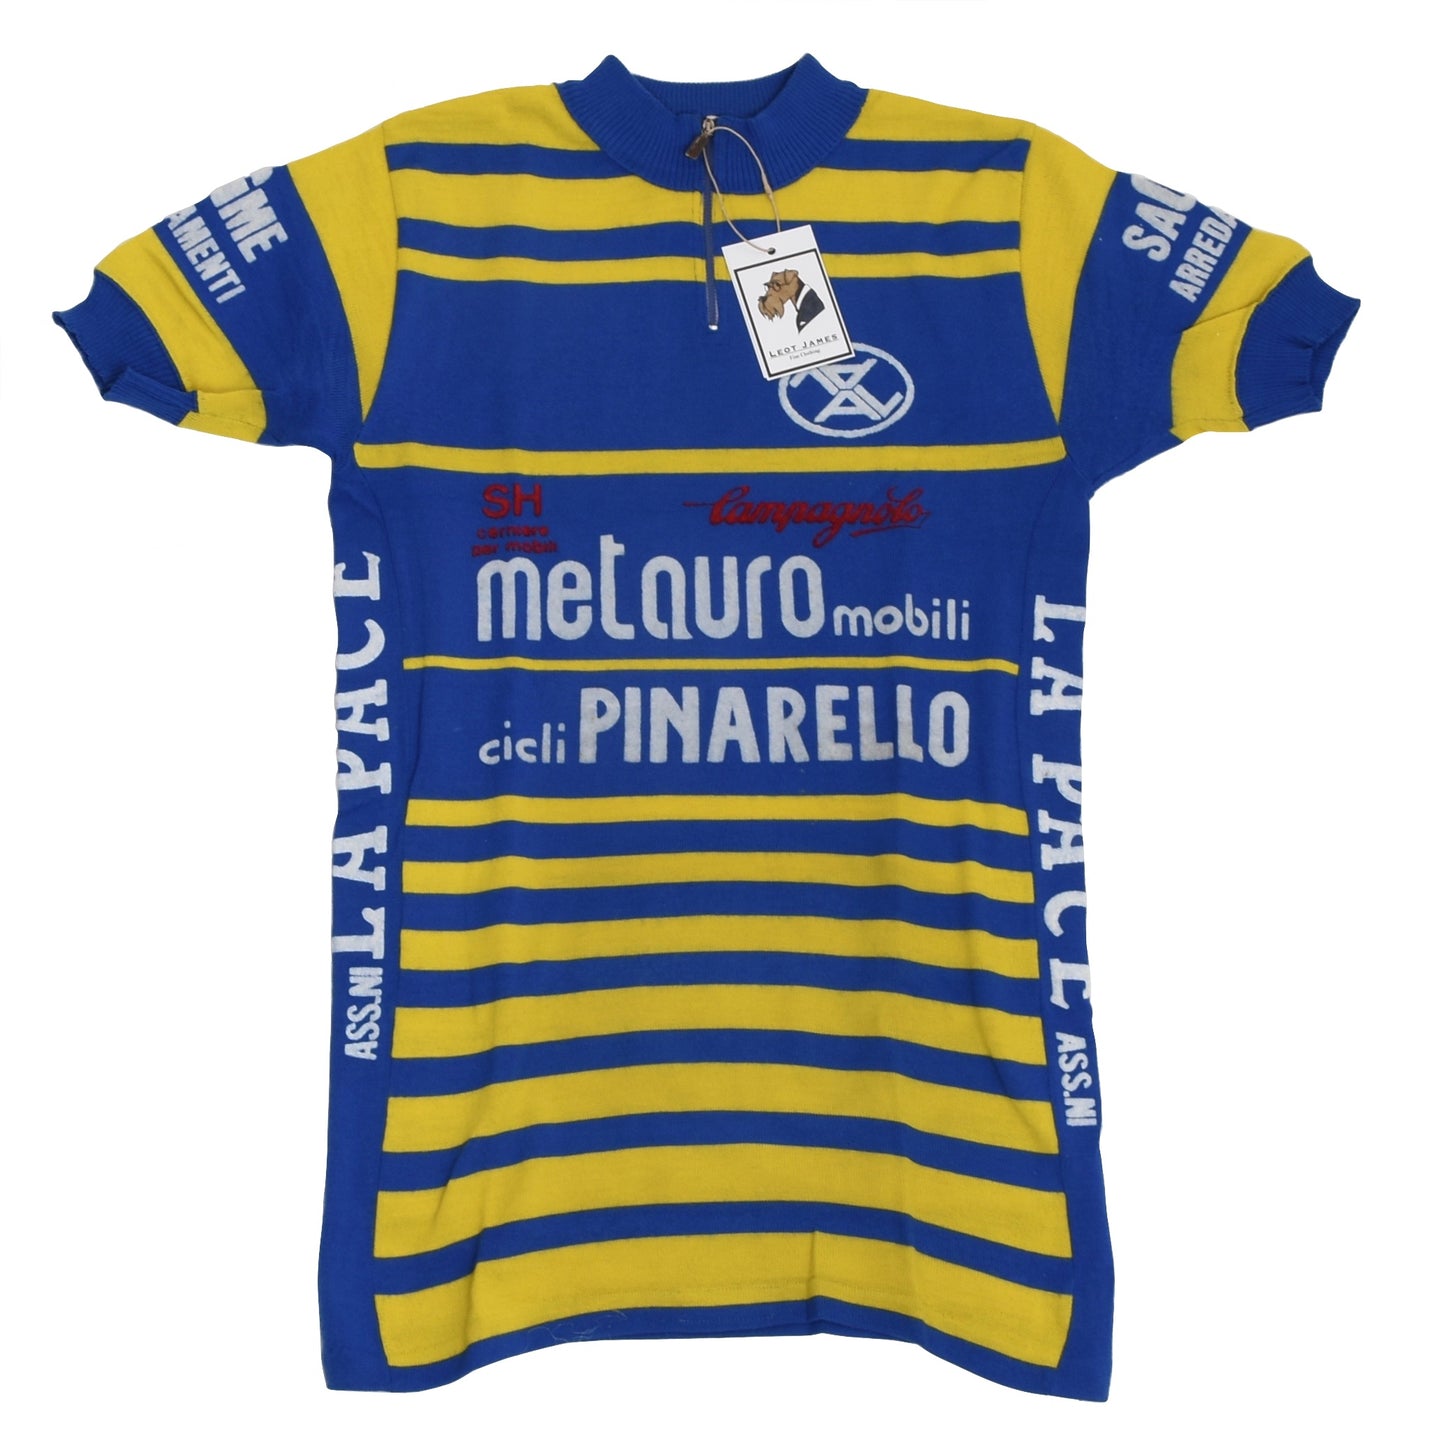 Vintage Wool Blend Pinarello Cycling Jersey - Blue & Yellow